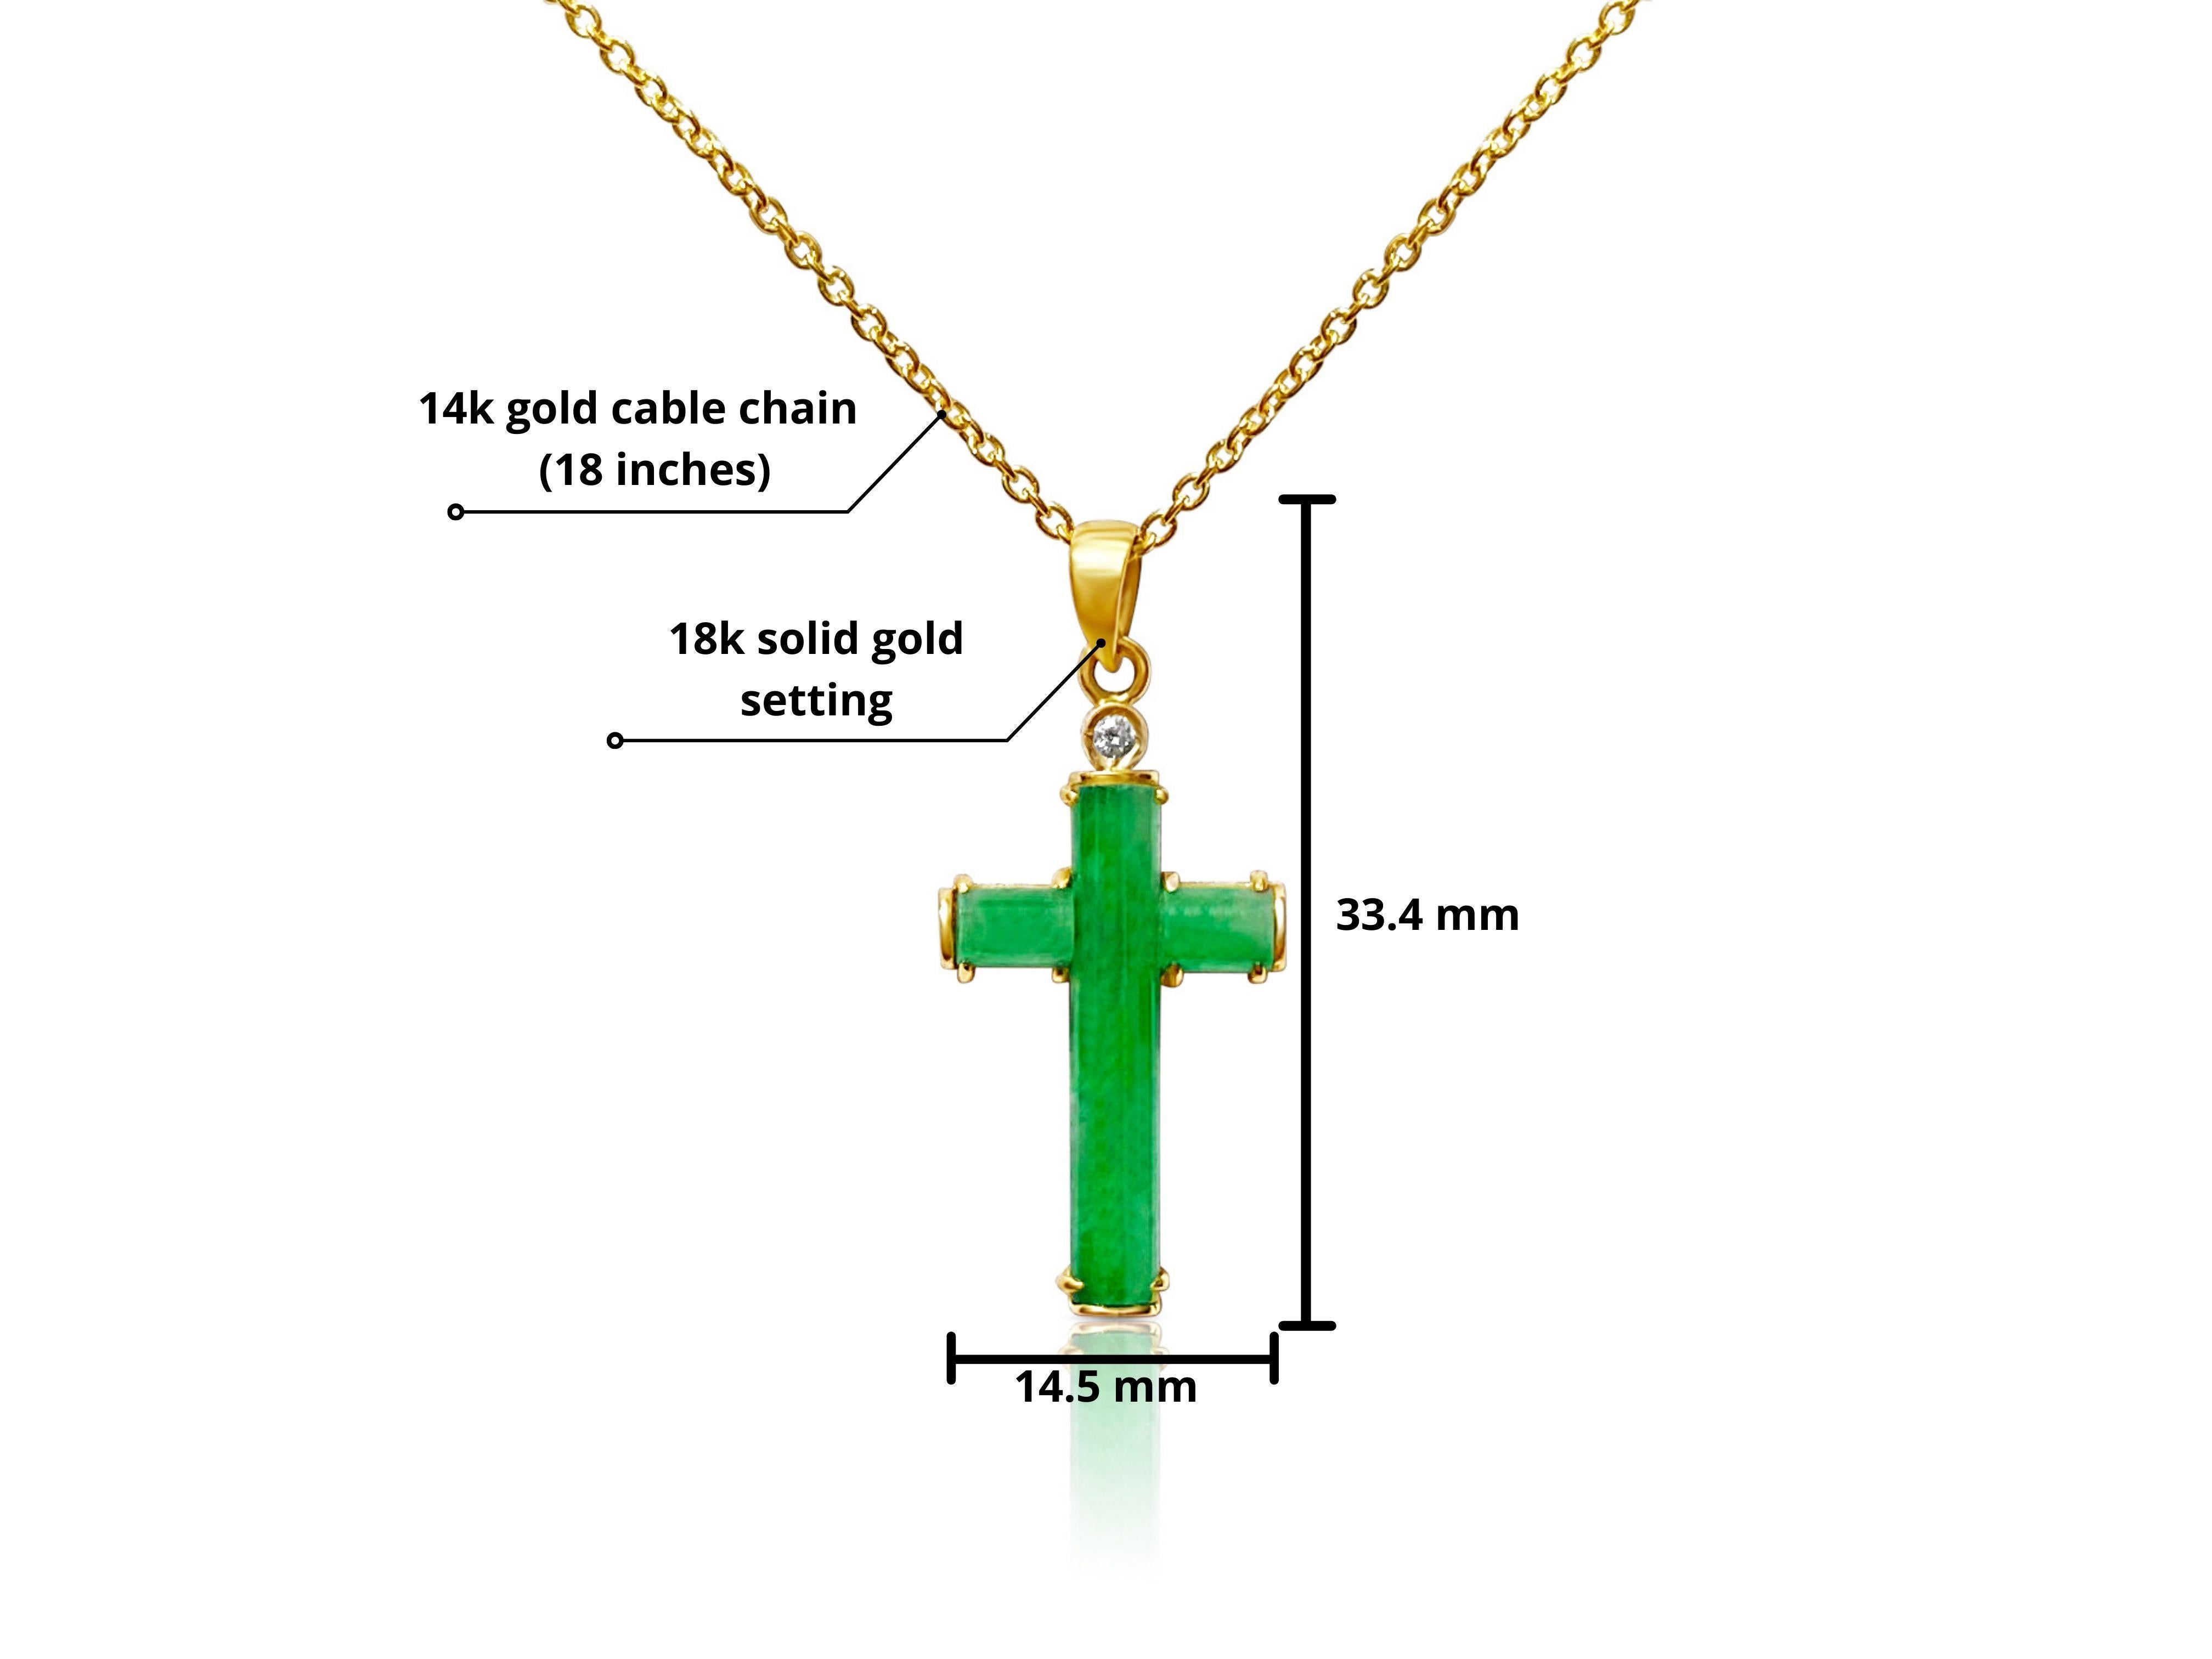 Incredible gemstones and craftsmanship on full display with this cross shaped natural Jade pendant. This pendant holds a top quality natural Jade that emits vibrant green color hues. Especially under sunlight. Jade is perfectly contrasted with a